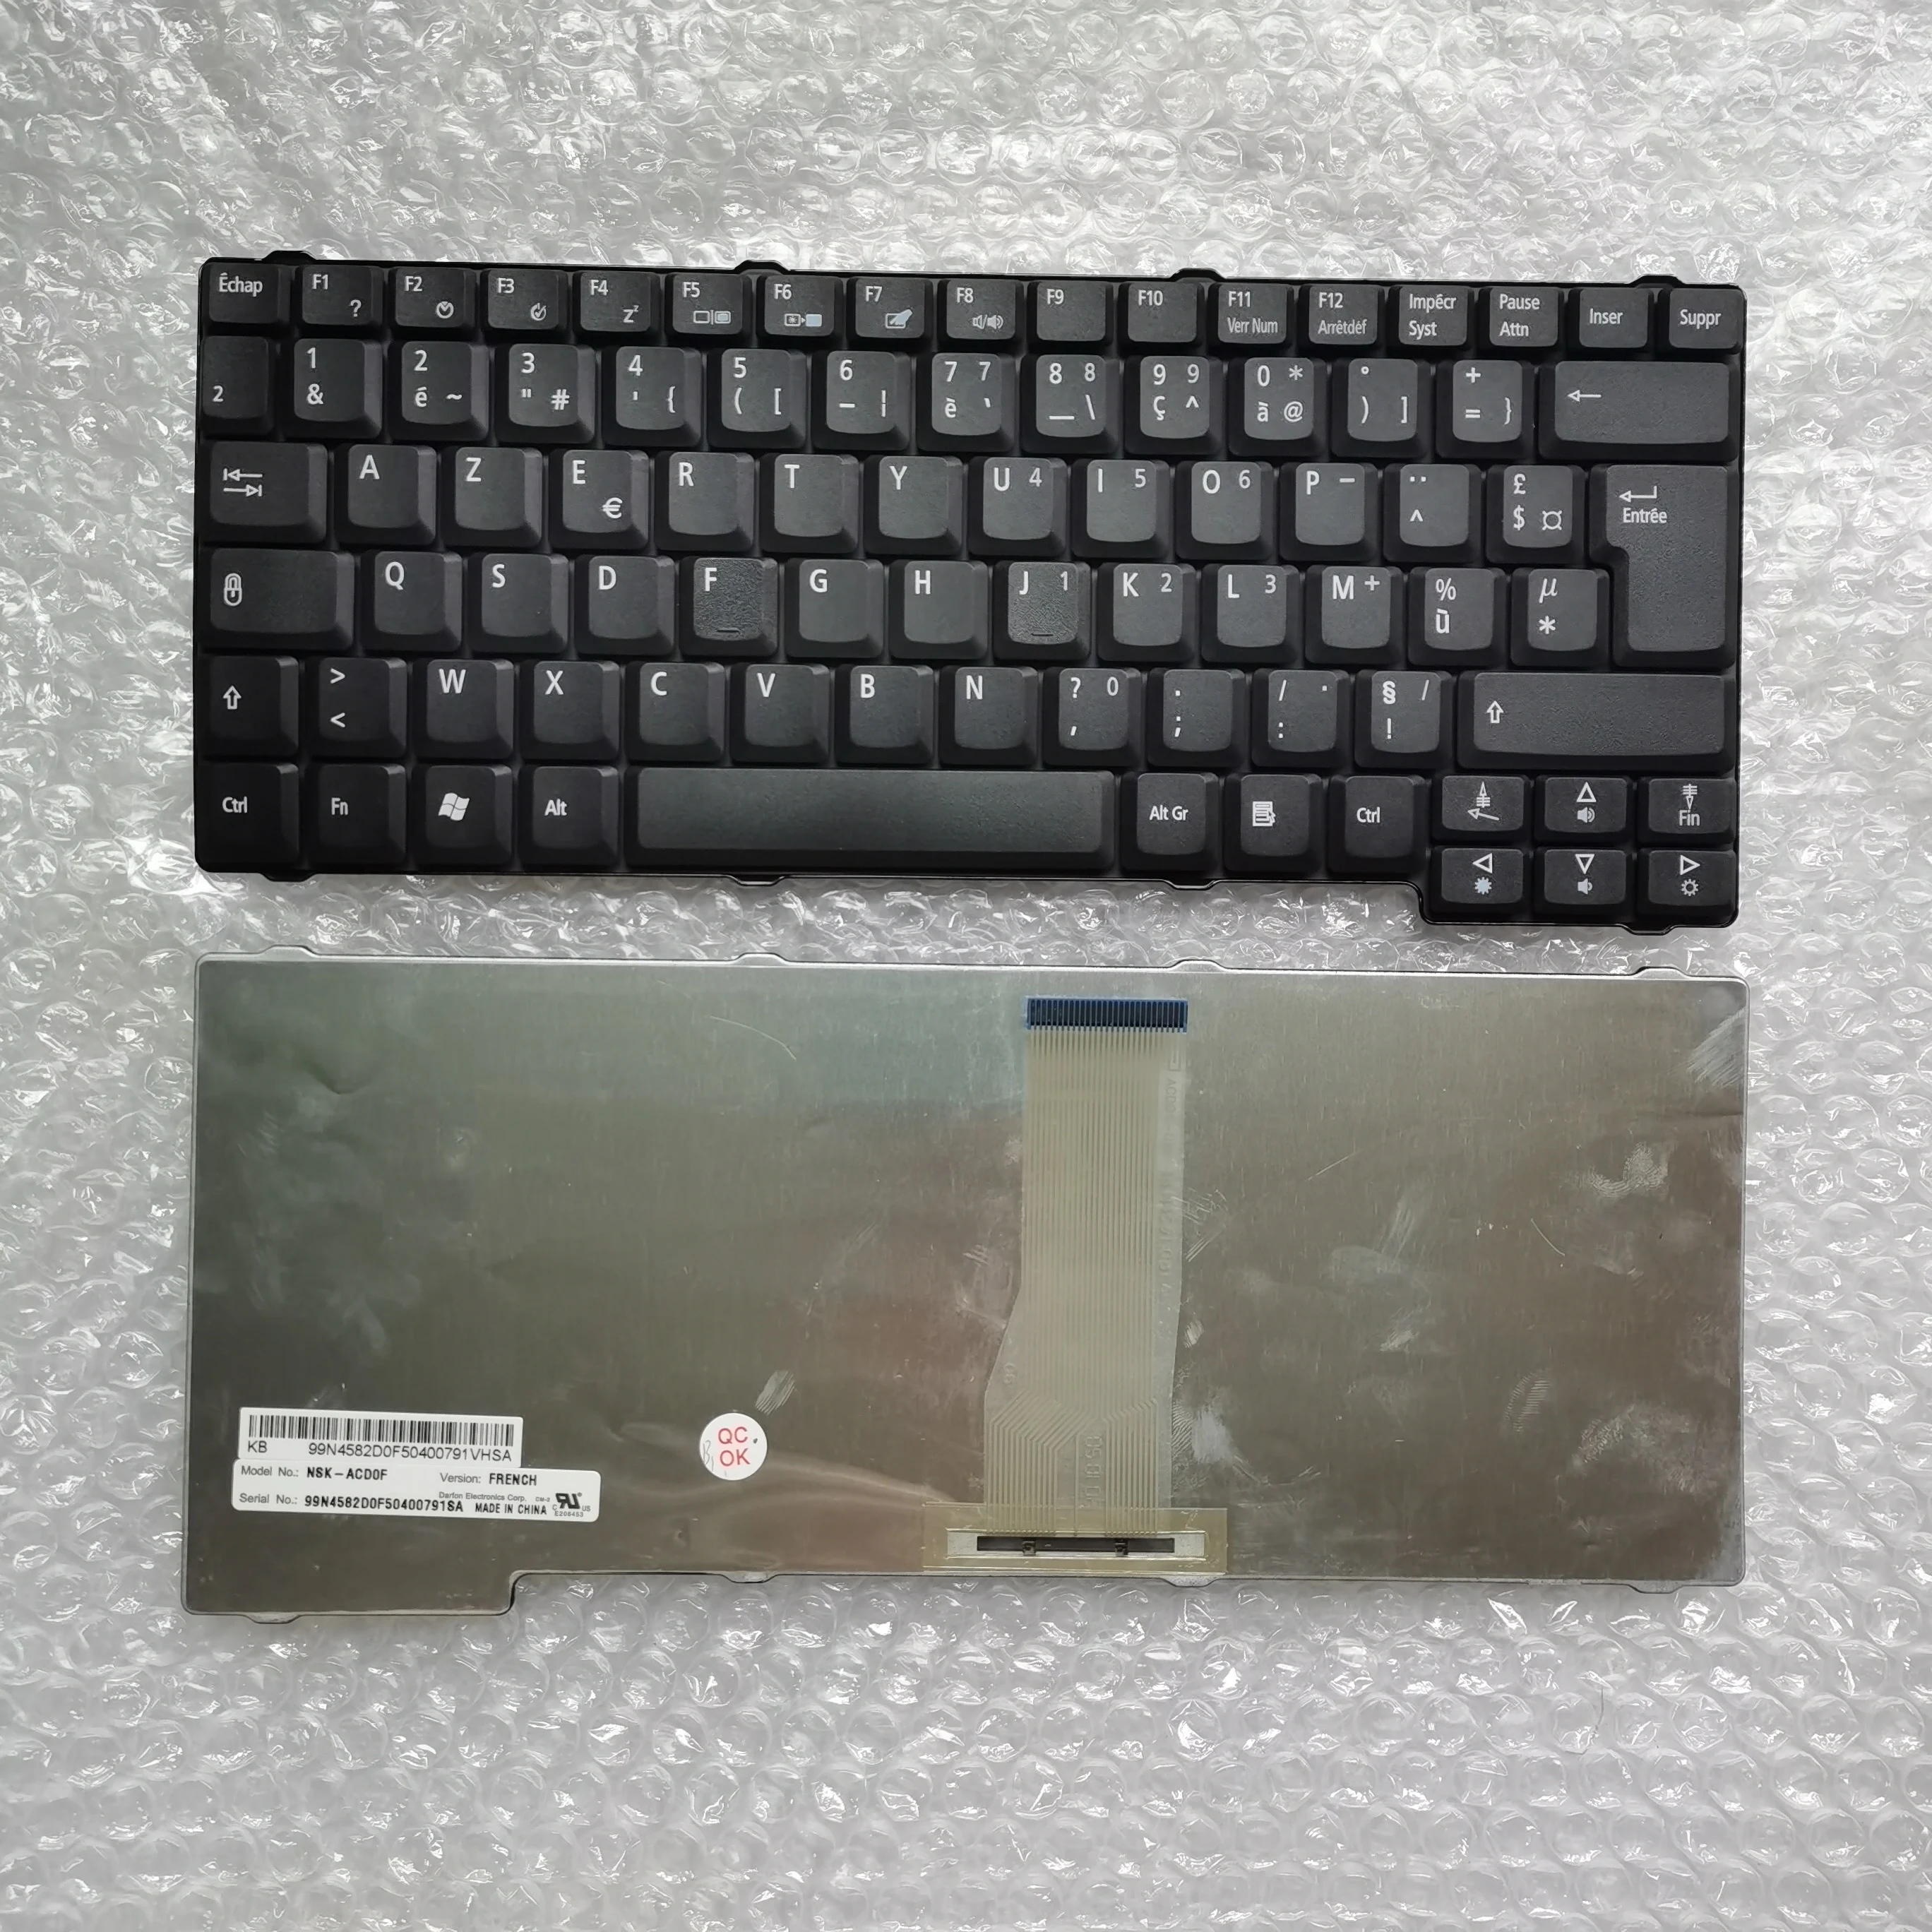 

XIN French Keyboard For Acer Travelmate TM240 250 2000 2100 2600 1360 1520 1660 FR Laptop Keyboard Black NSK-ACD0F